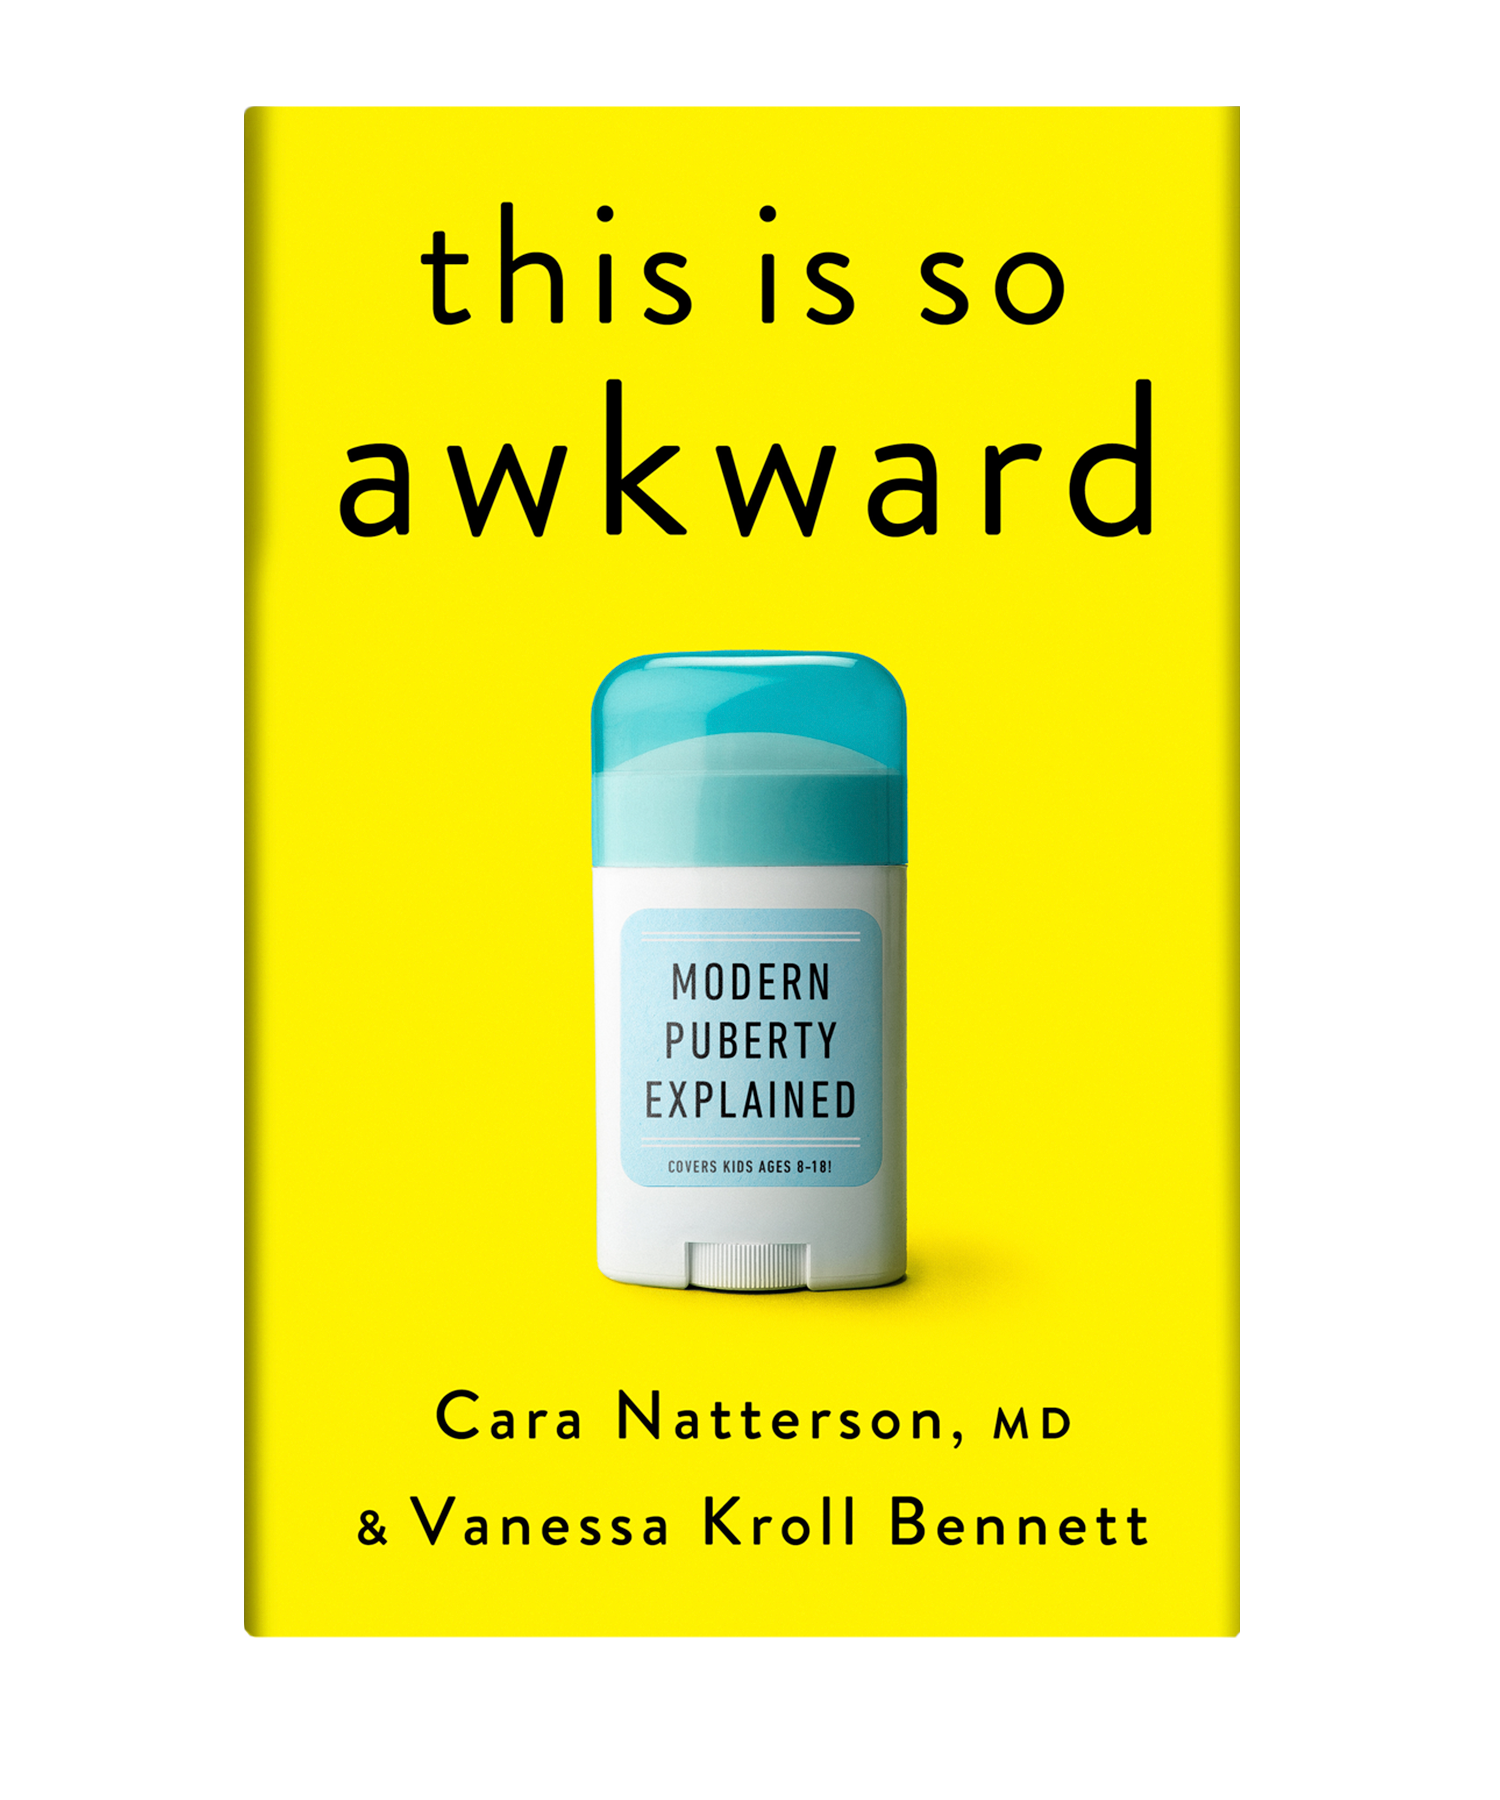 this is so awkward BOOK